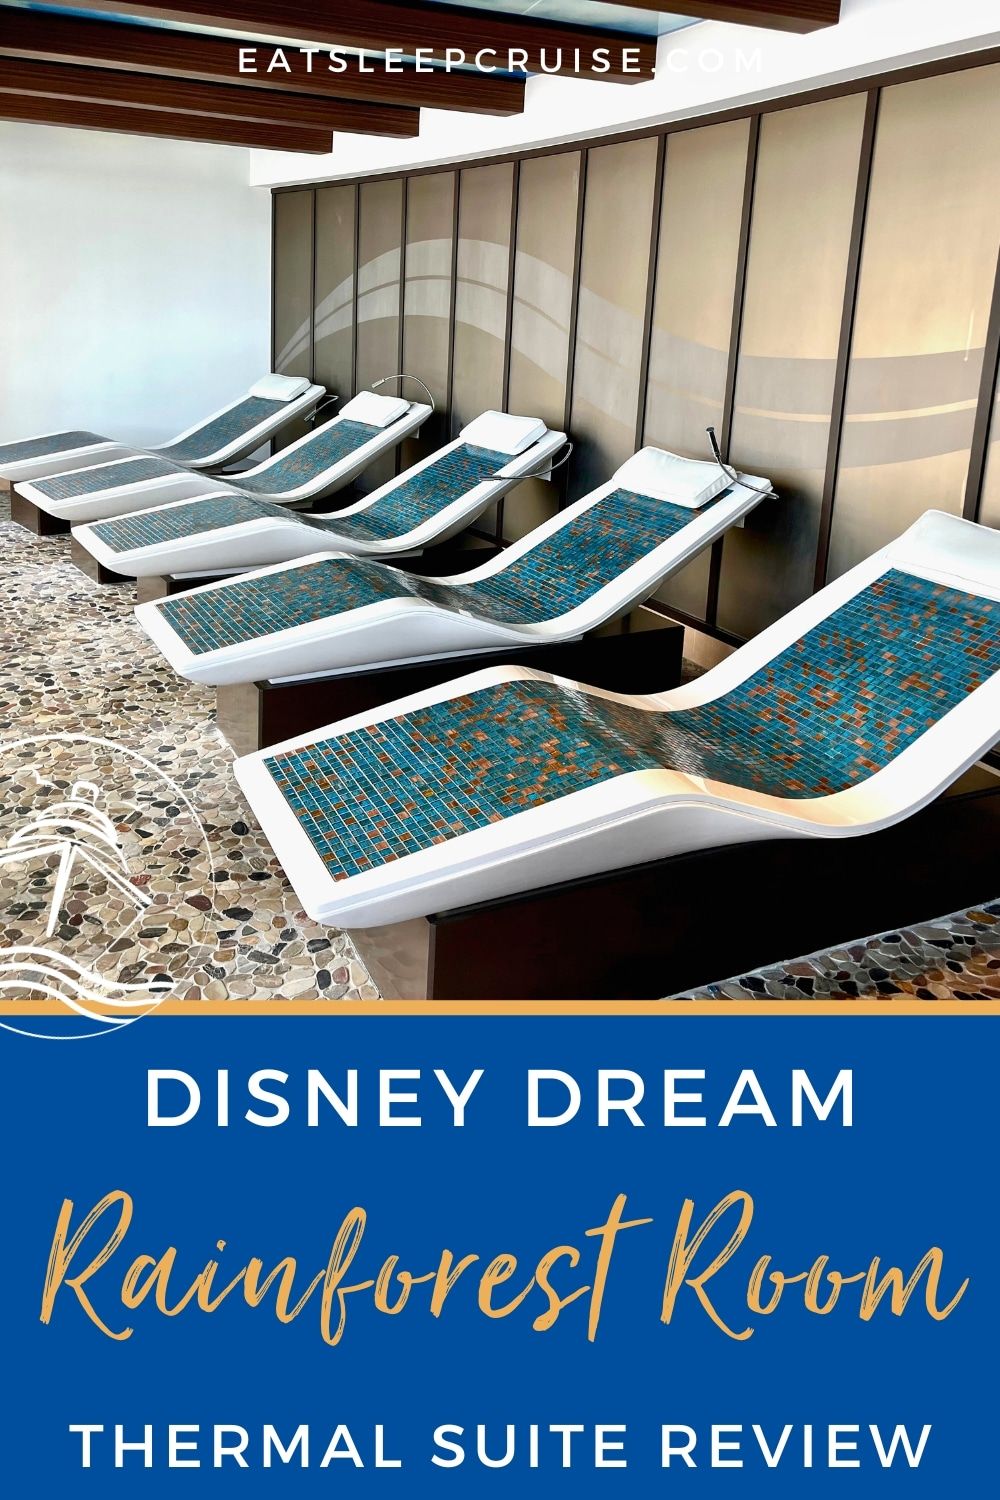 We Tested Out the Disney Dream Rainforest Room - Was It Worth It?